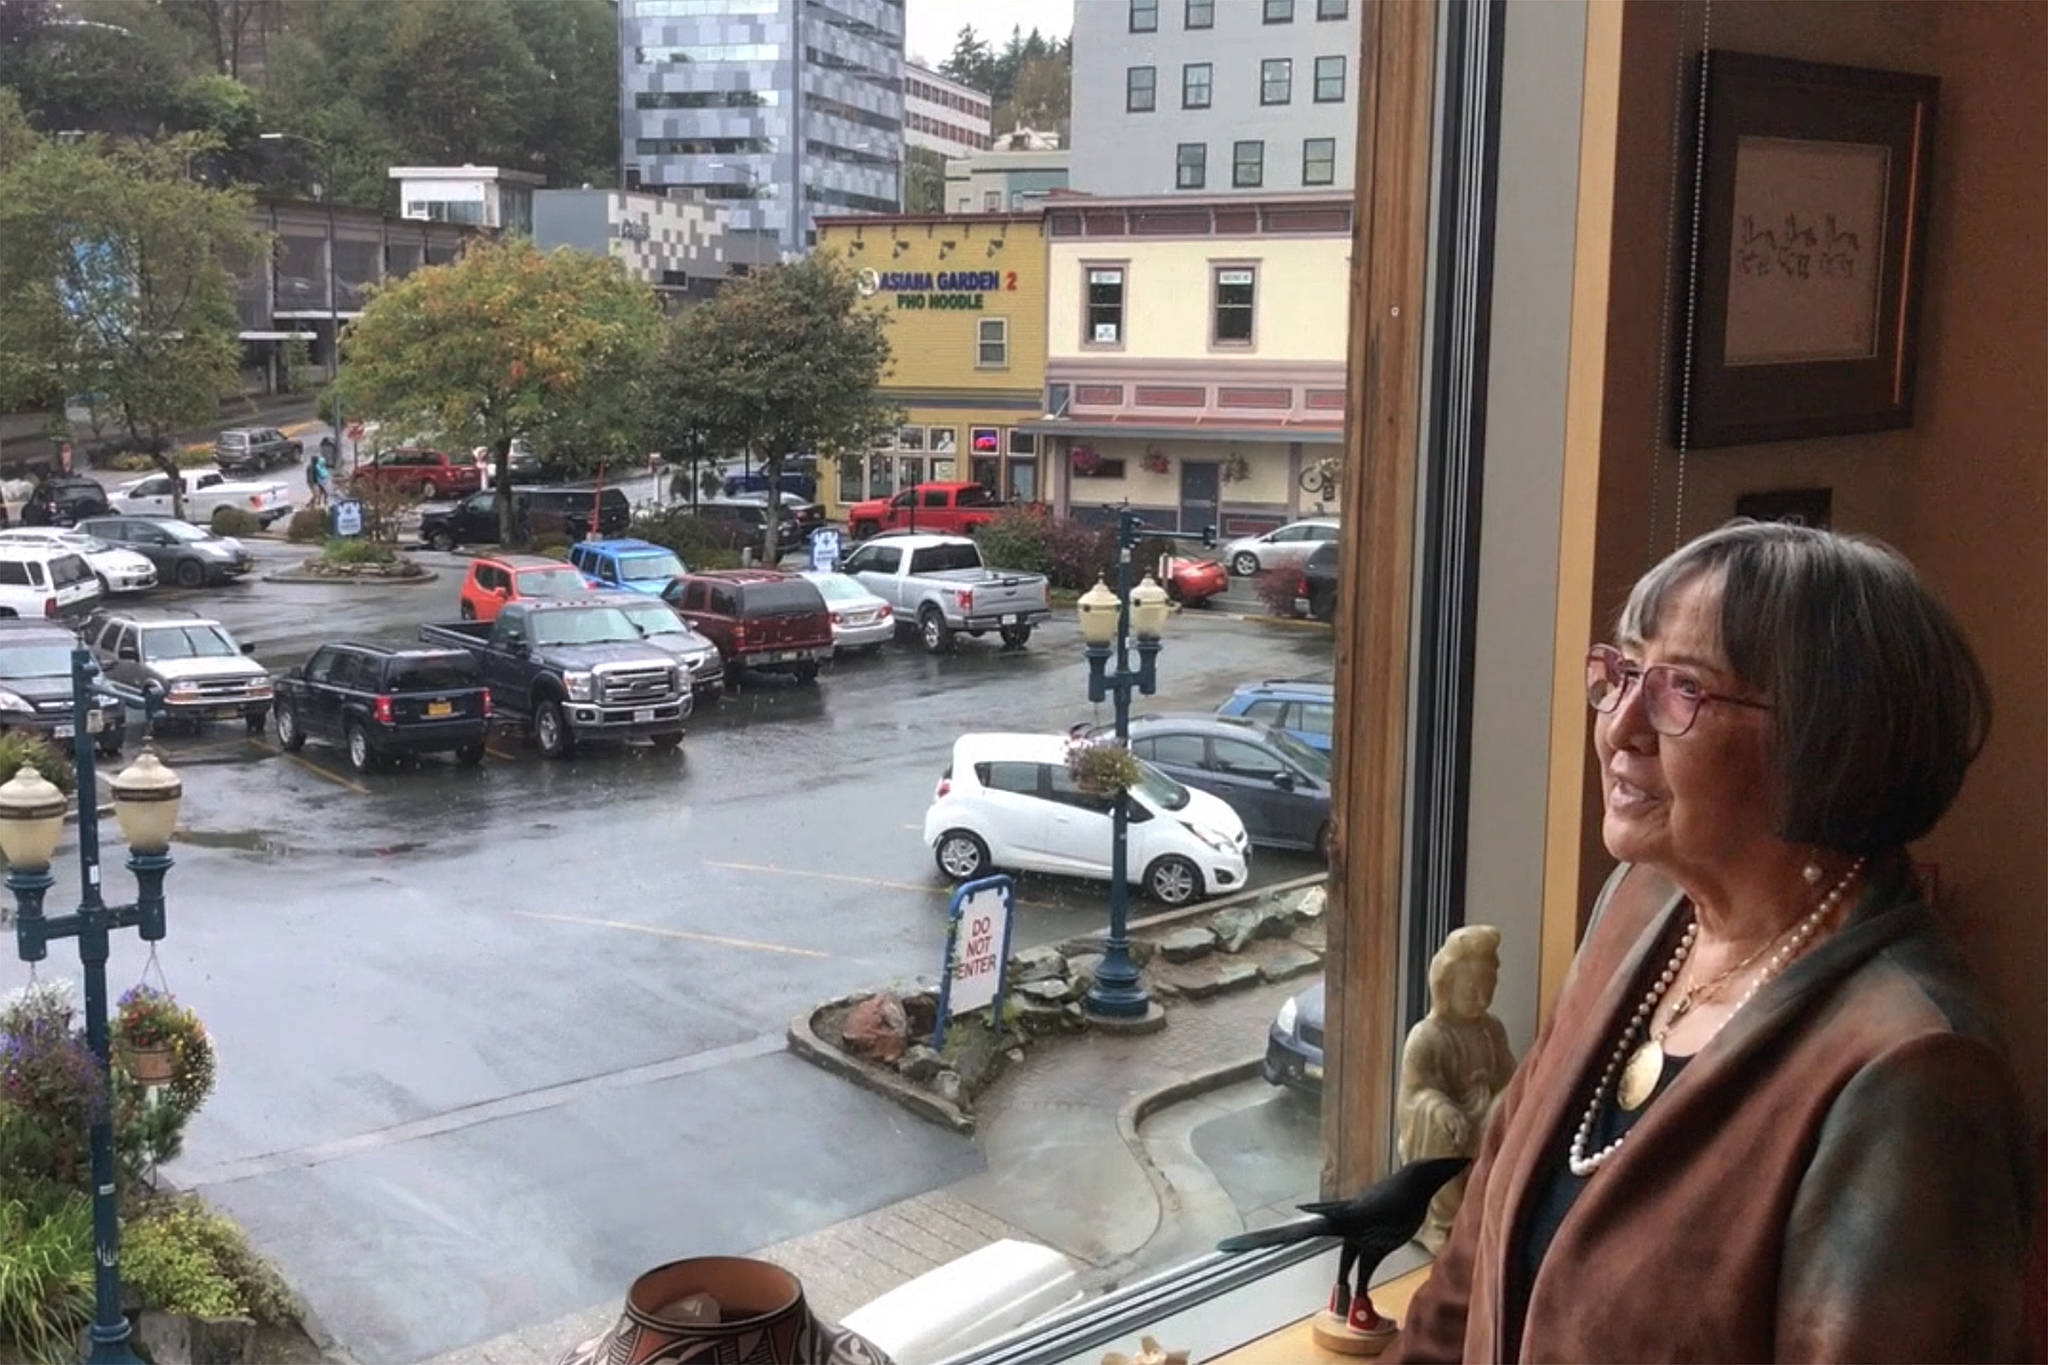 Dr. Rosita Worl, president of the Sealaska Heritage Institute, speaks Wednesday, Sept. 18, 2019, about plans to build a Sealaska Heritage Arts Campus in the current location of the Sealaska Corporation parking lot. SHI this week received word that it received a federal grant of more than $5.6 million for the $12 million project, which, along with donations and grants from other sources, puts the project at 70 percent toward its funding goal. (Michael Penn | Juneau Empire)